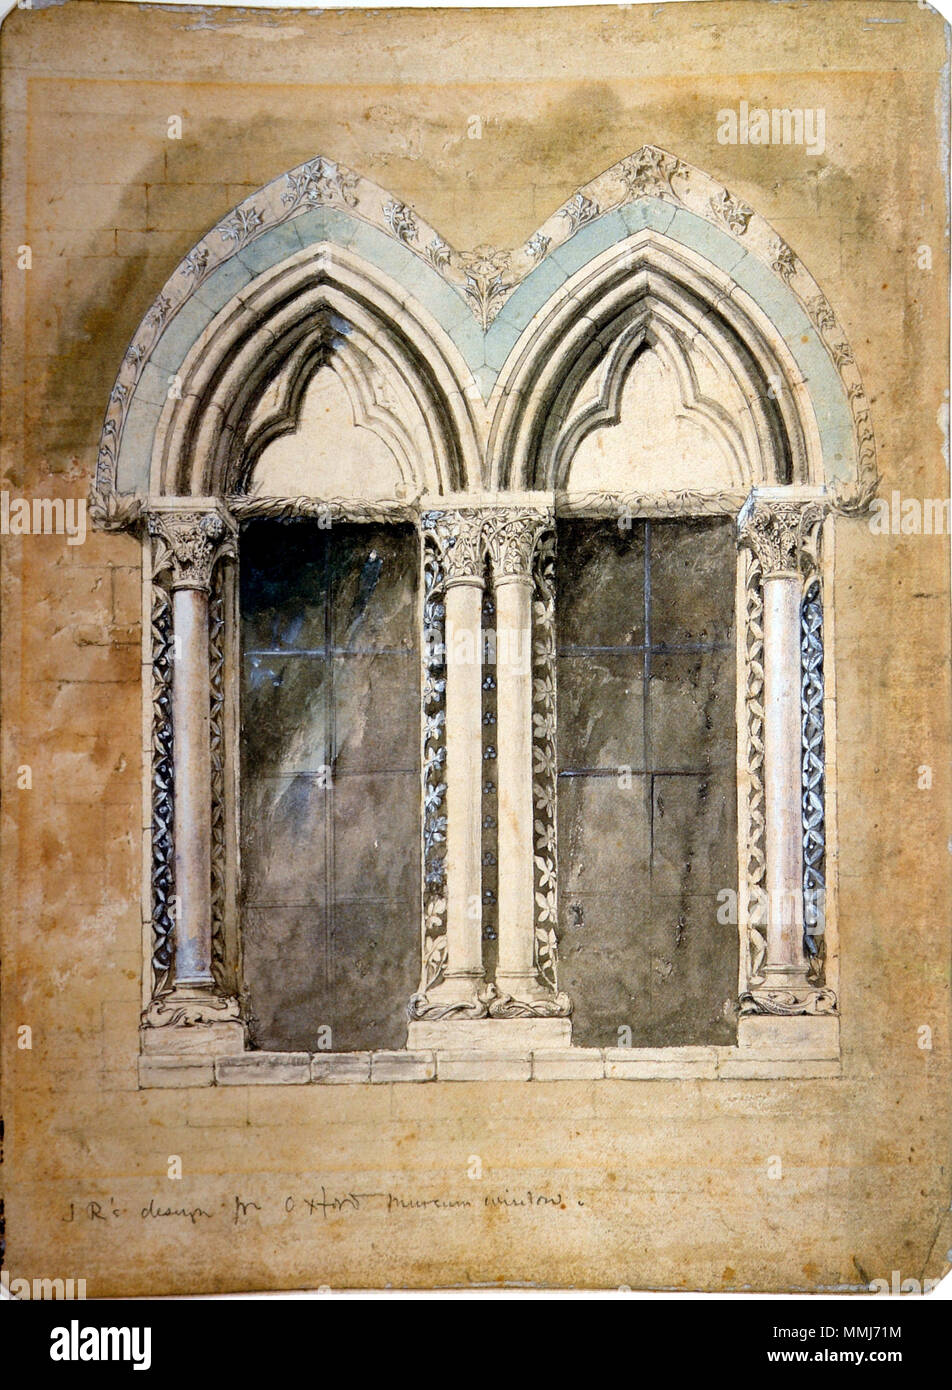 . Design for a Window, Oxford Museum, pencil, watercolour and bodycolour, 38.7 x 29 cm  . 1858.   John Ruskin  (1819–1900)       Alternative names Ruskin  Description British author, poet, artist and art critic  Date of birth/death 8 February 1819 20 January 1900  Location of birth/death London English: Brantwood, Lake District  Work location England, Venice, Switzerland, France  Authority control  : Q179126 VIAF:?73859585 ISNI:?0000 0001 2139 3446 ULAN:?500006262 LCCN:?n79006950 NLA:?36583544 WorldCat Design for a Window Oxford Museum Stock Photo